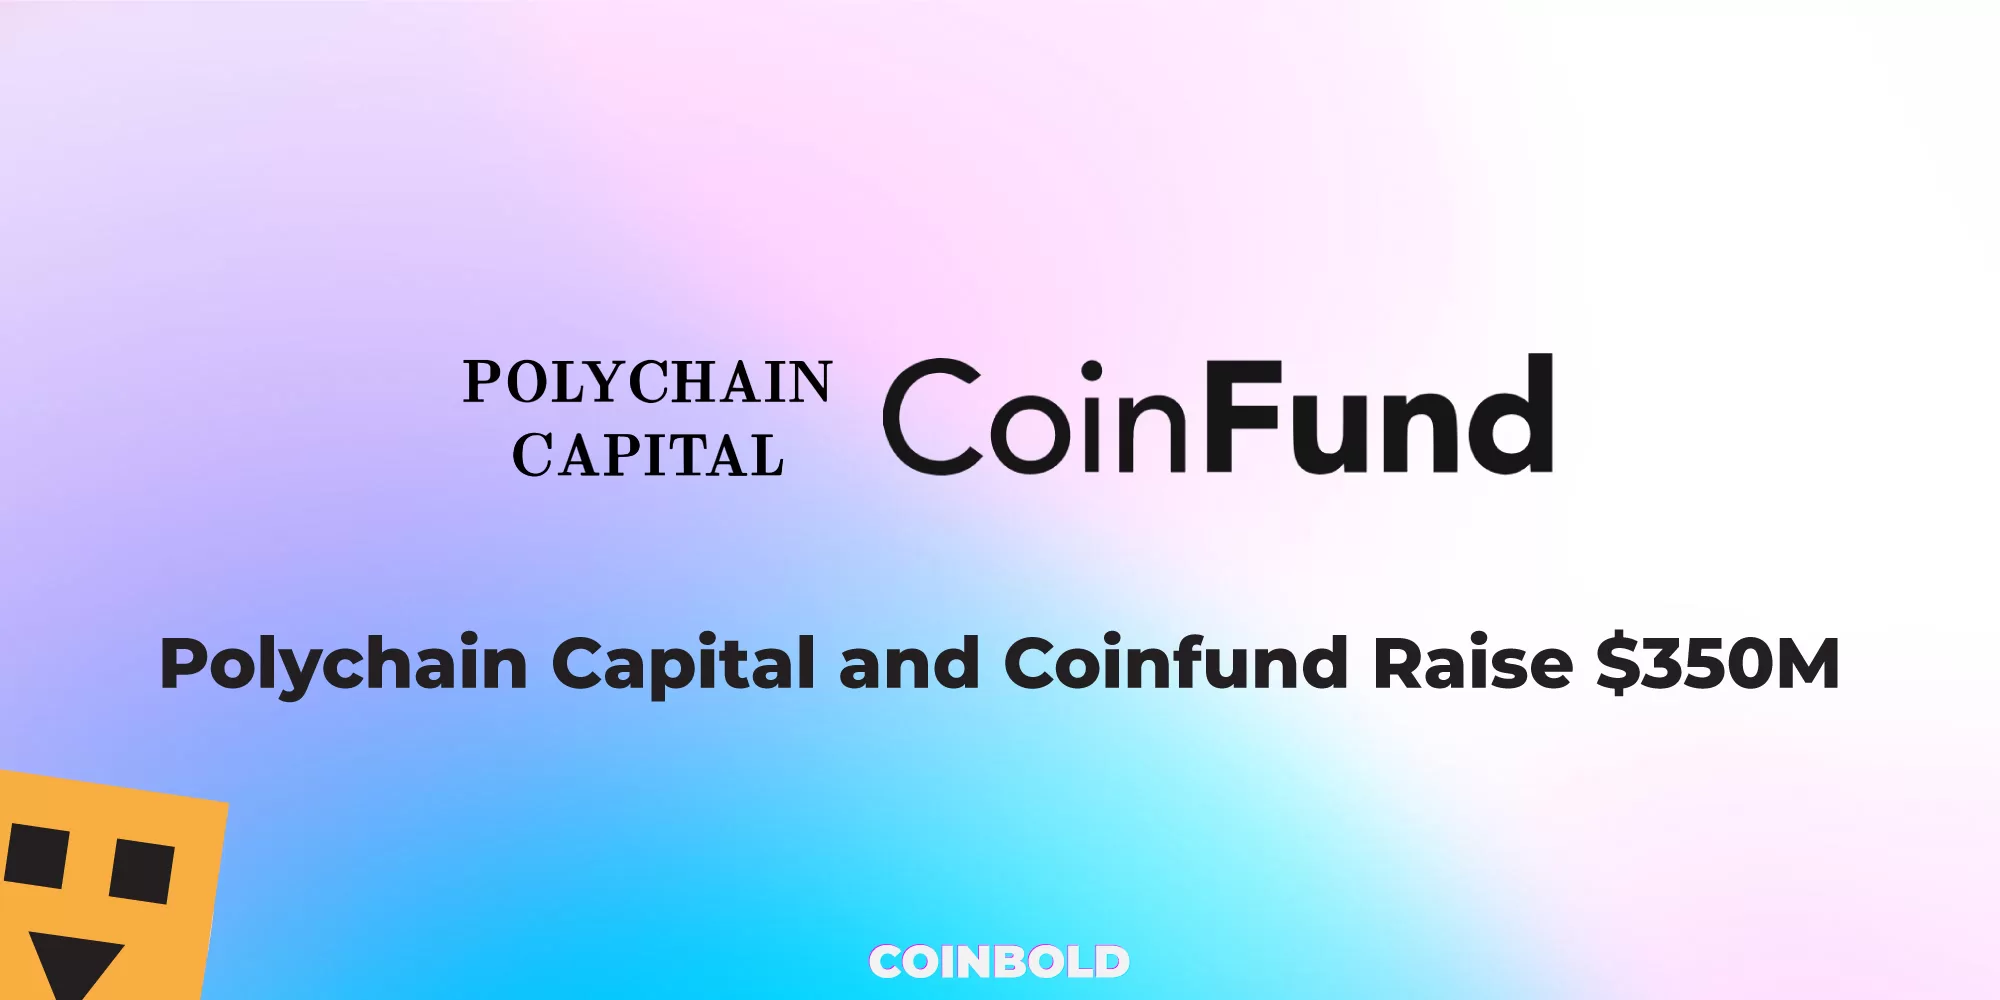 Polychain Capital and Coinfund Raise $350M